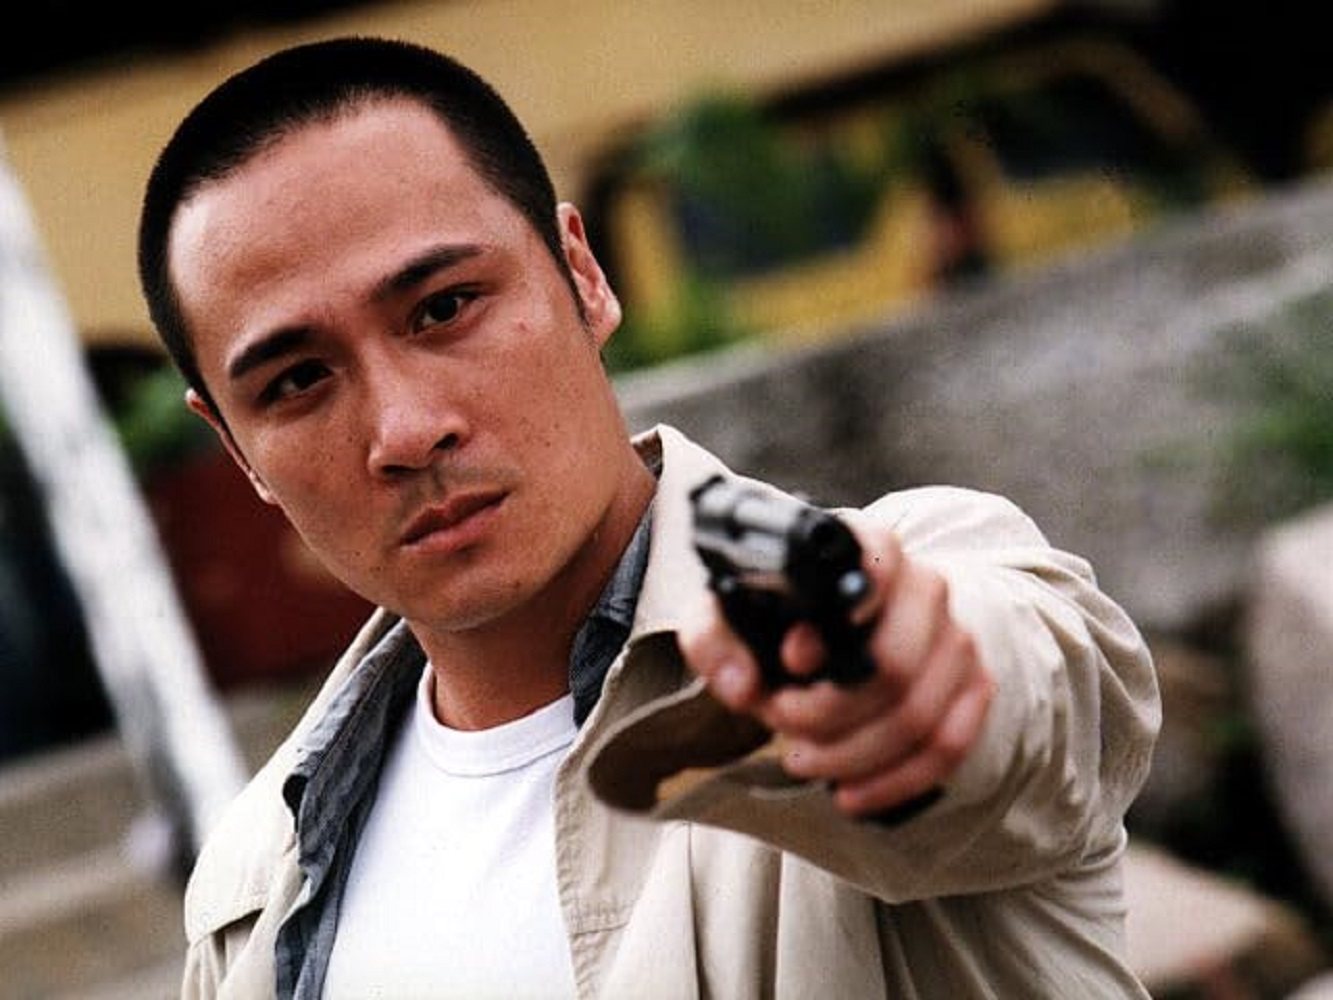 Ip Man director Wilson Yip started out making quirky Hong Kong comedies, ghost stories and other dramas, which invariably featured offbeat characters. Above: Francis Ng in a still from “Bullets Over Summer” (1999). 